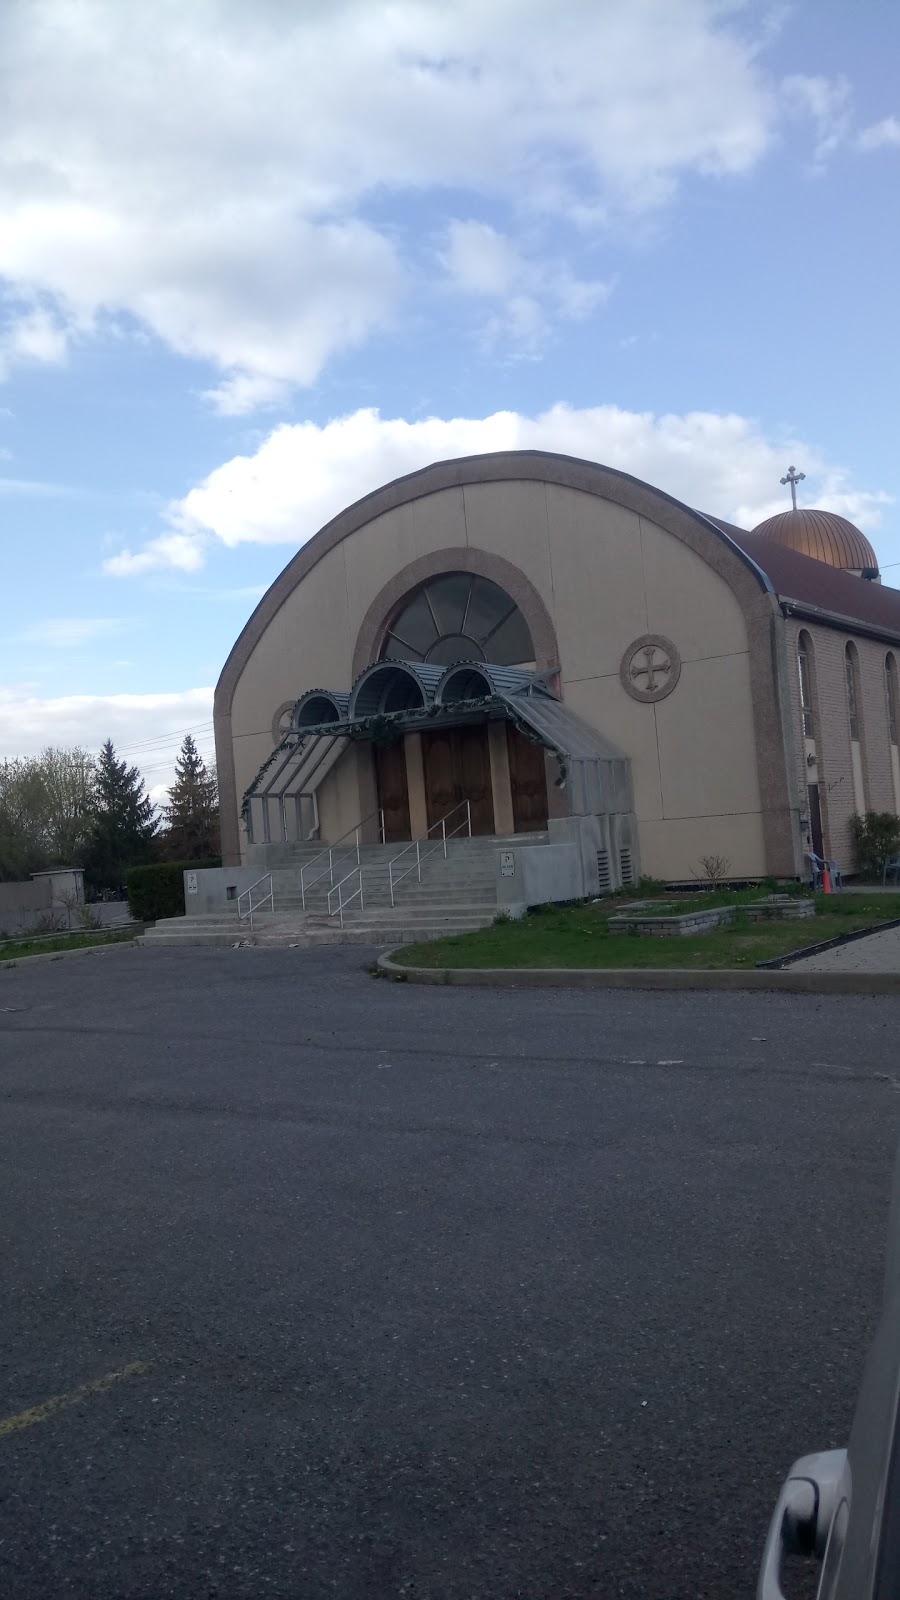 St. Mary Coptic Orthodox Church, Ottawa | 1 Canfield Rd, Nepean, ON K2H 5S7, Canada | Phone: (613) 596-0052